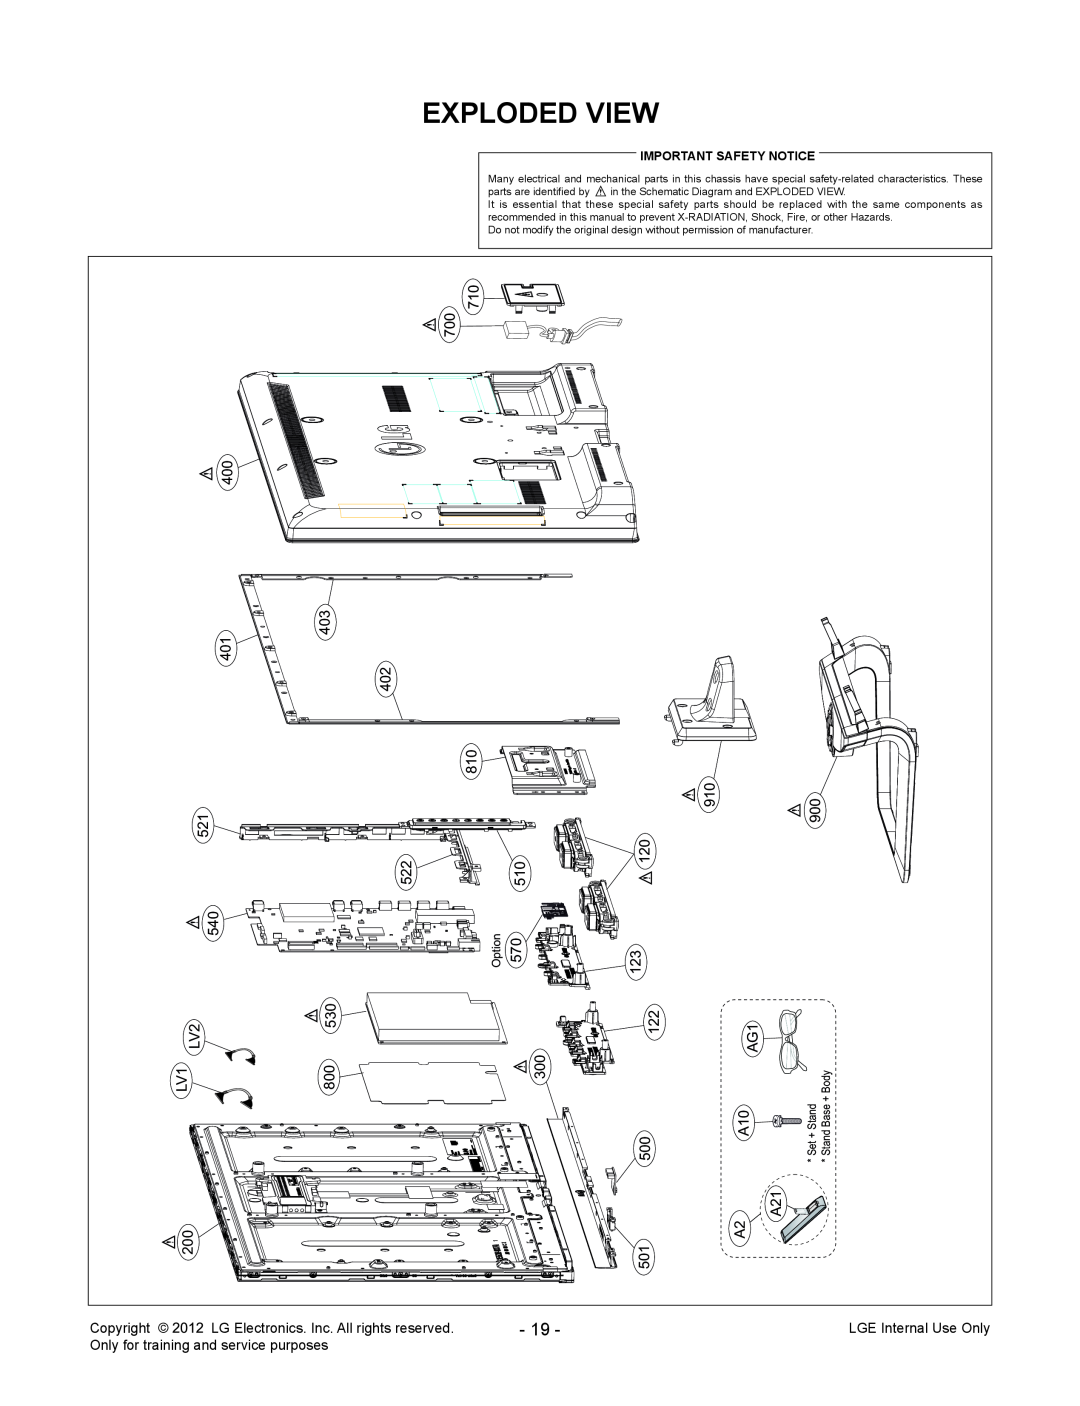 LG Electronics 32LM640S/640T-ZA service manual Exploded View, Important Safety Notice 